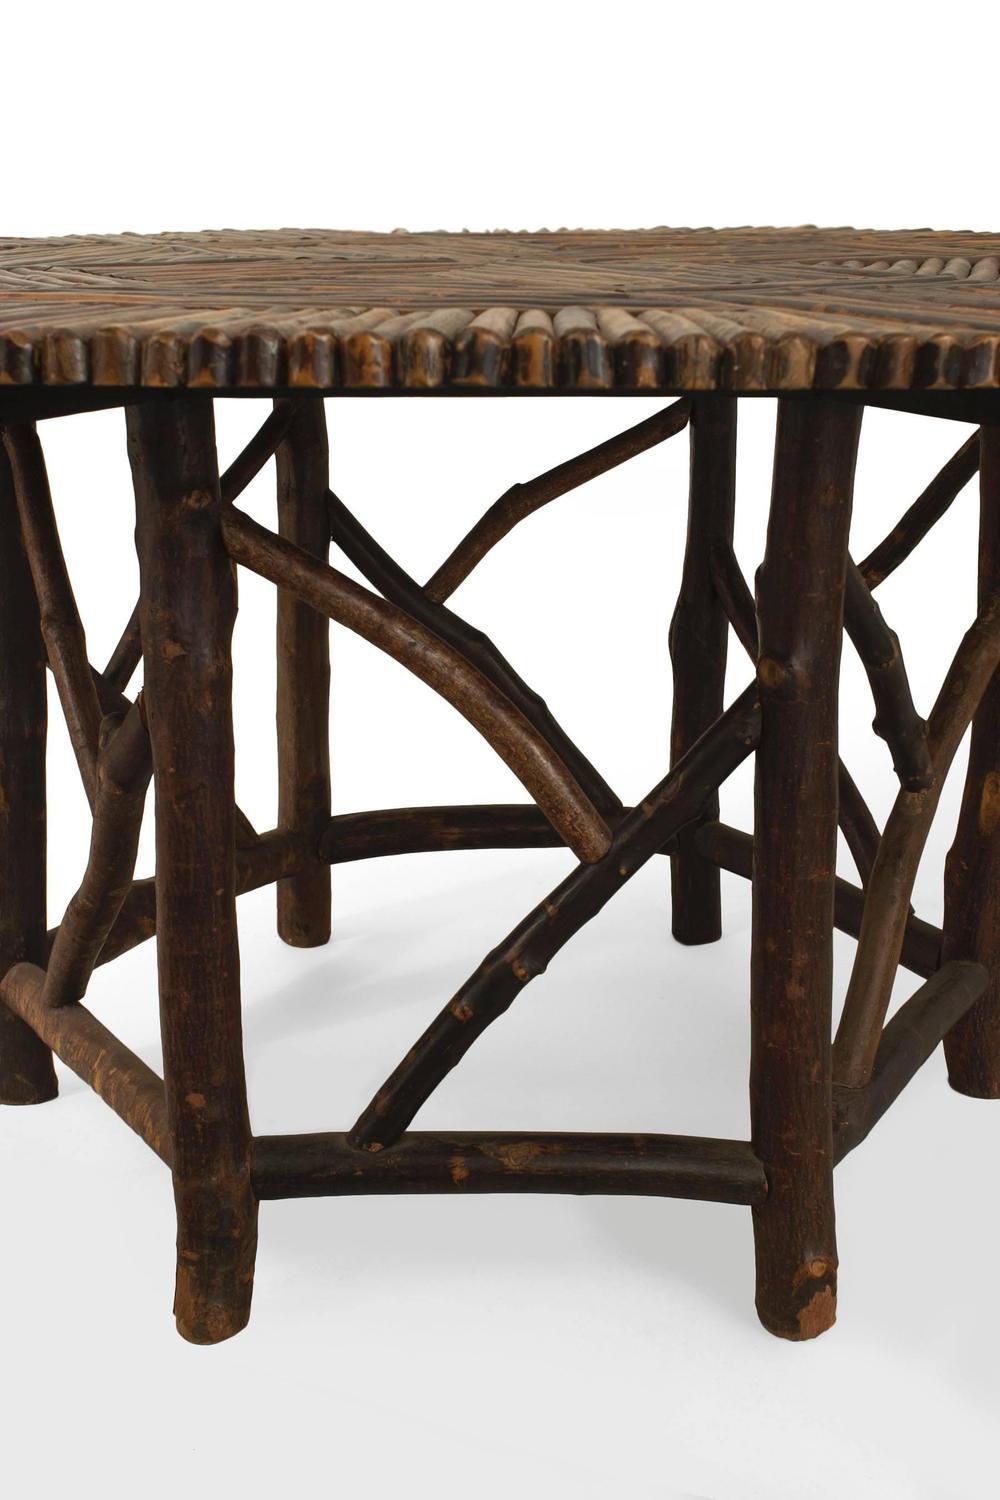 American Adirondack Style Round Twig Dining Table at 1stdibs